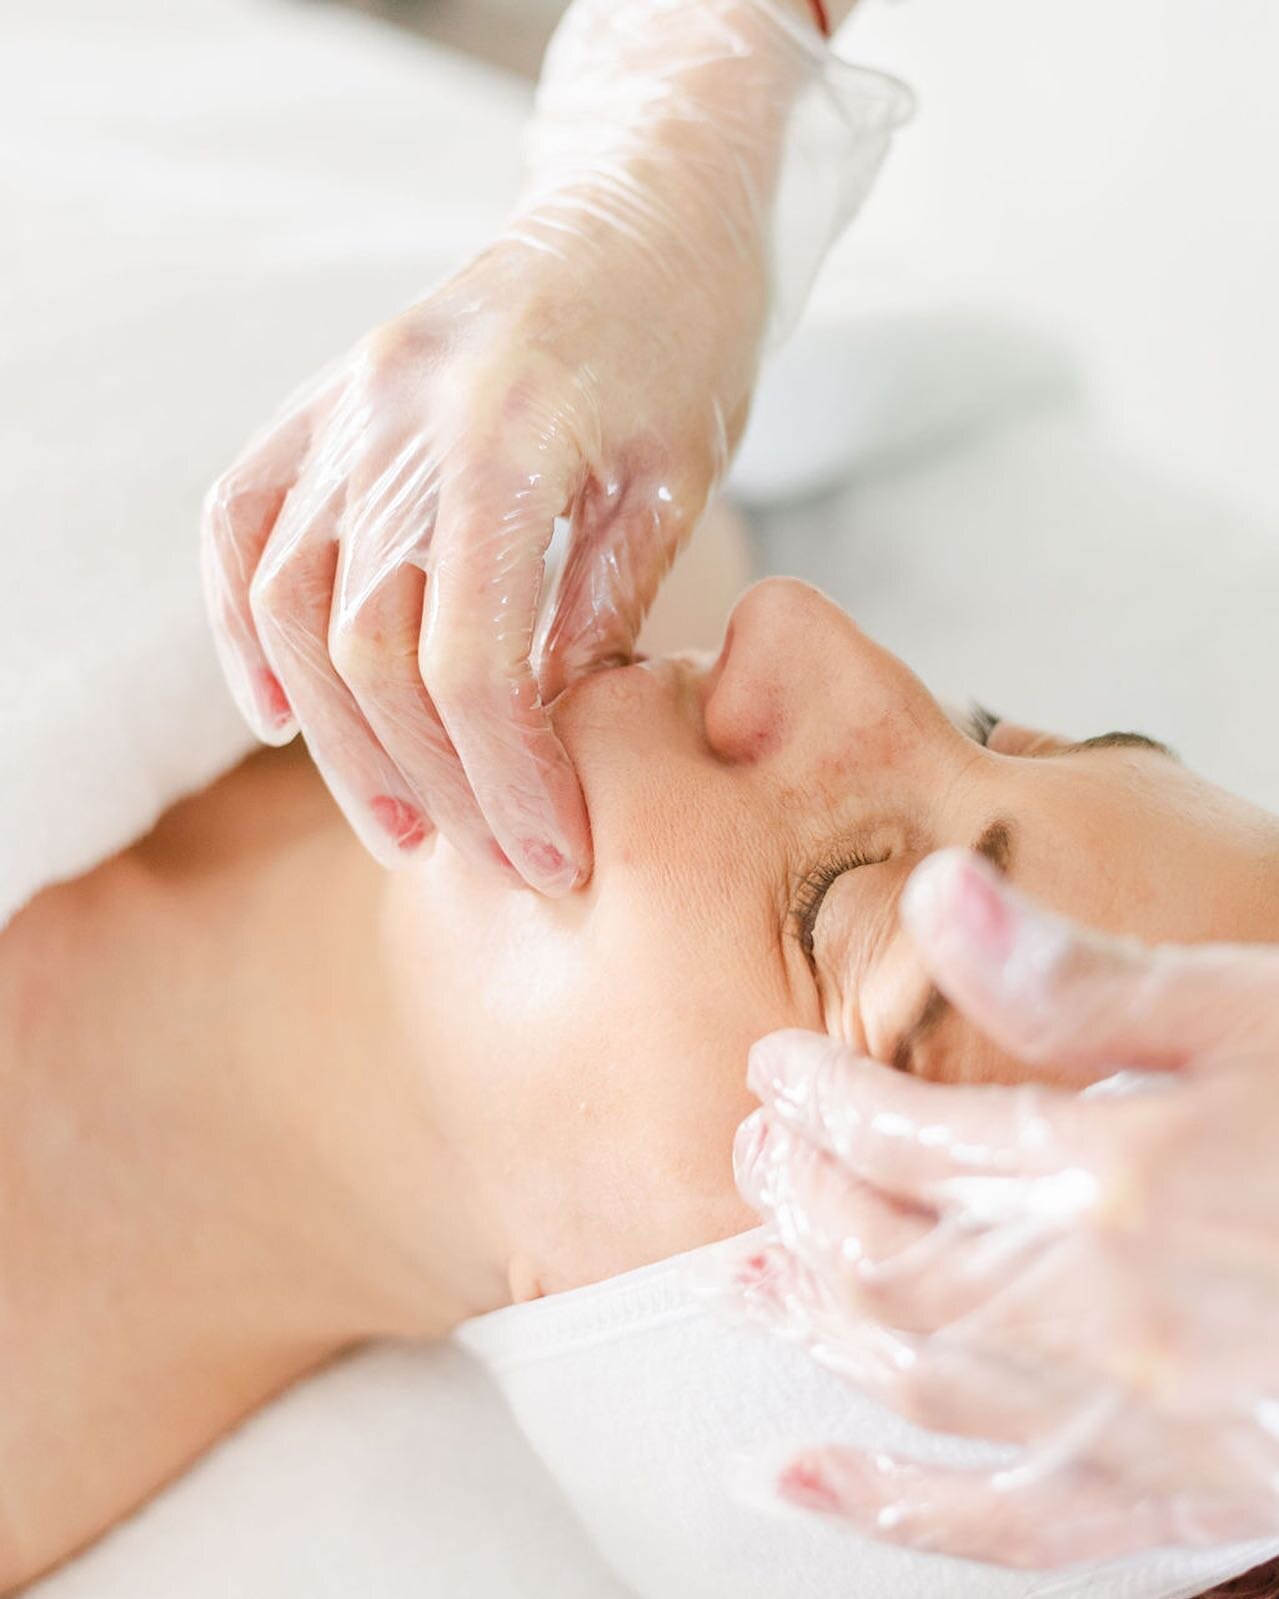 Benefits of Buccal Massage Include; 

&bull; Relieve and Reduce TMJ Pain.
&bull; Stimulate lymphatic system removing toxins, reducing puffiness and inflammation from the face.
&bull; Relieve Sinus pressure and congestion.
&bull; Ease Headaches /Migra